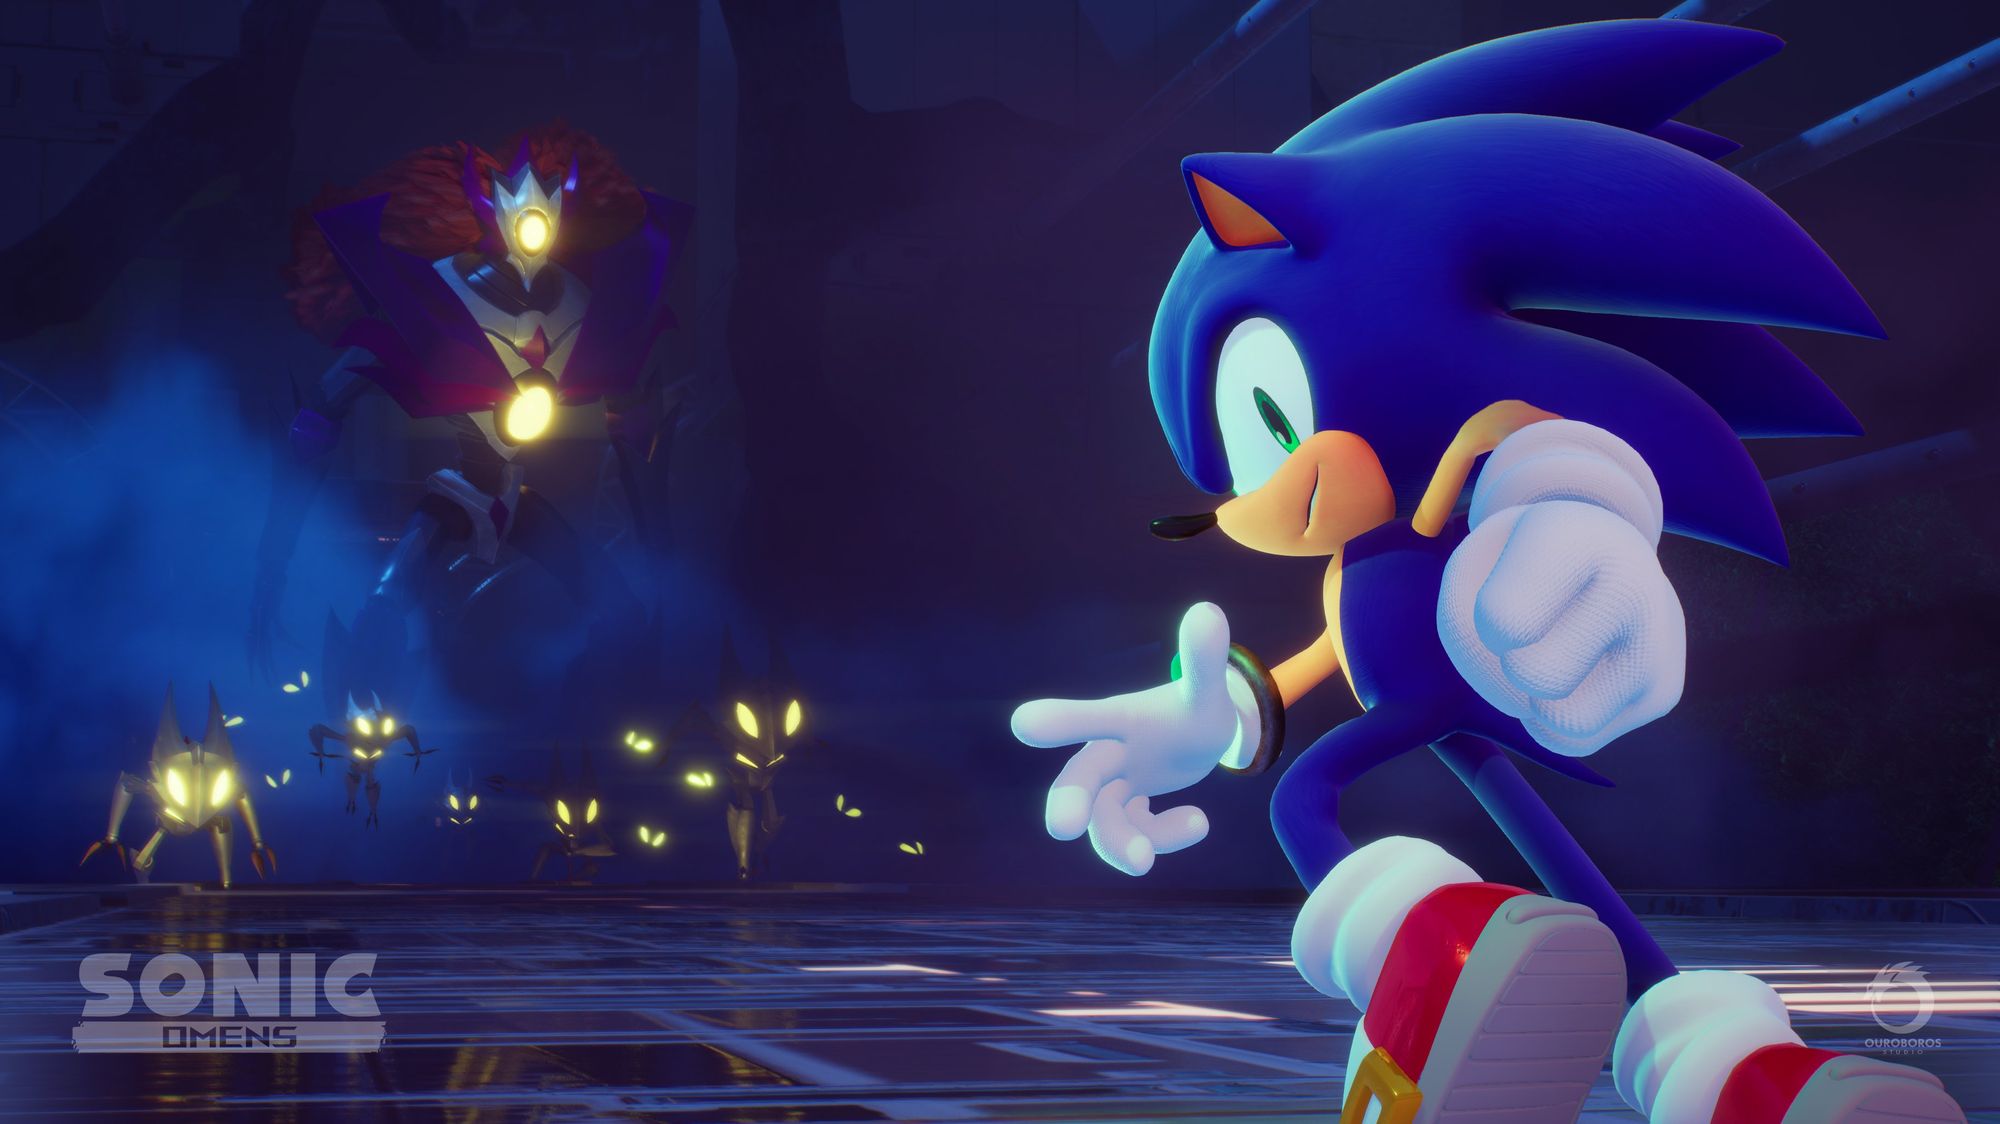 Sonic Omens: A Hypocritical Ambition